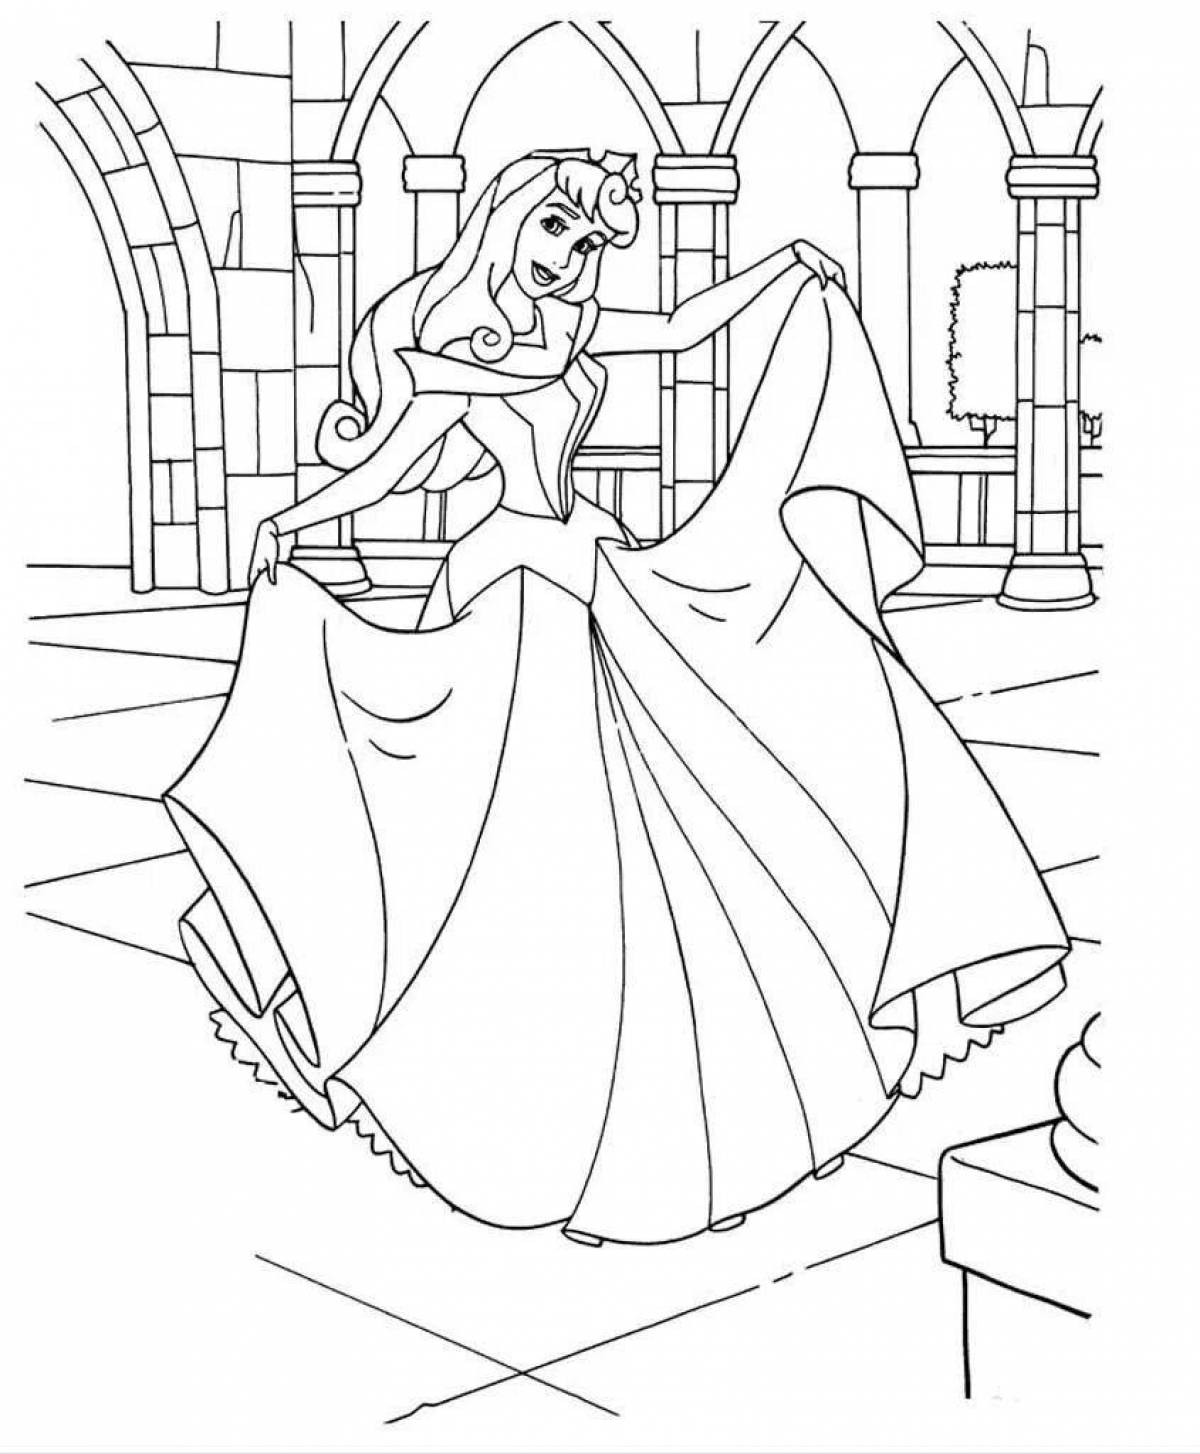 Delightful sleeping beauty coloring book for kids